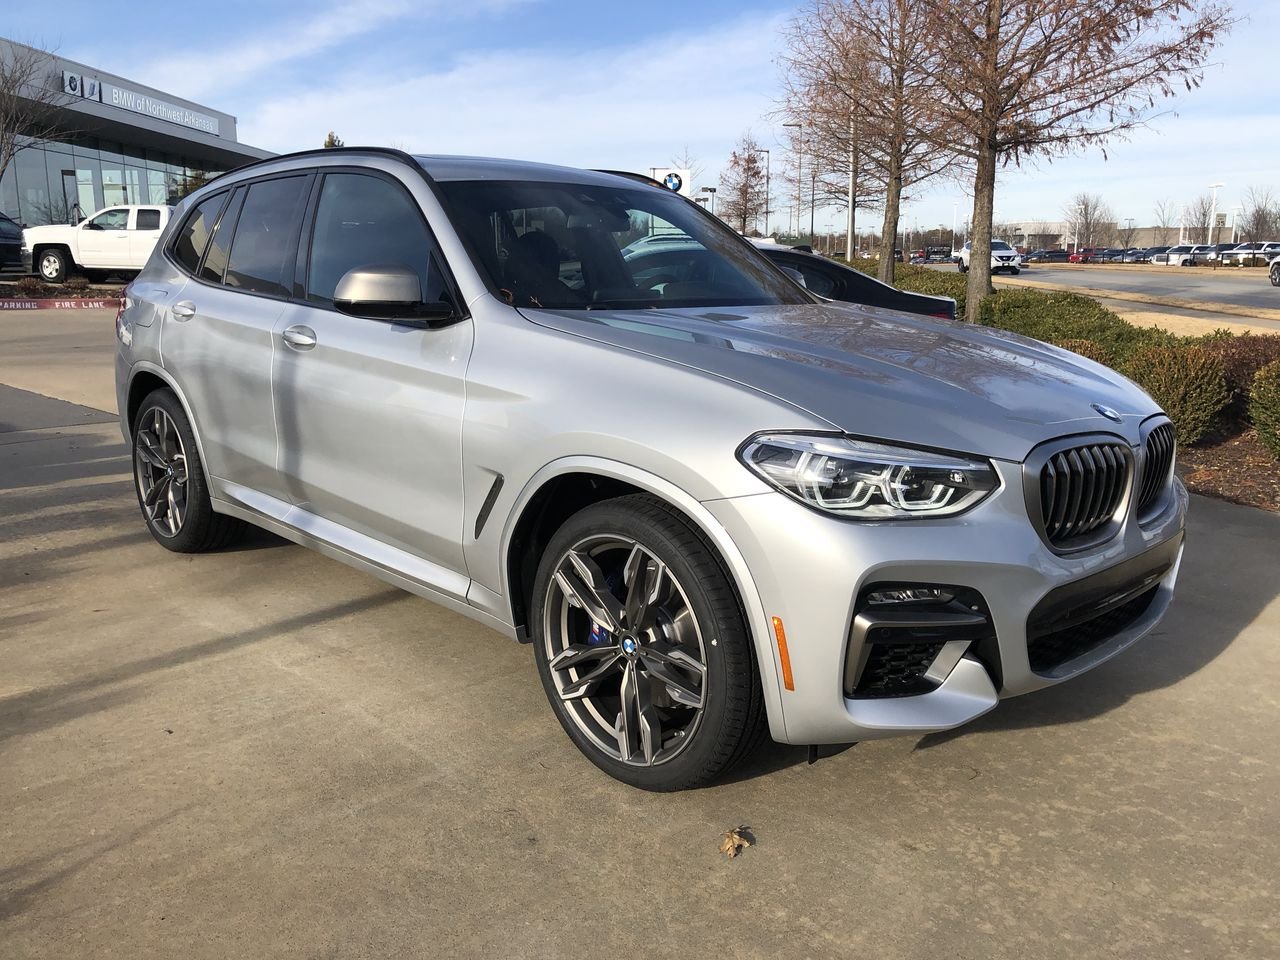 PreOwned 2020 BMW X3 M40i Sport Utility in Bentonville 